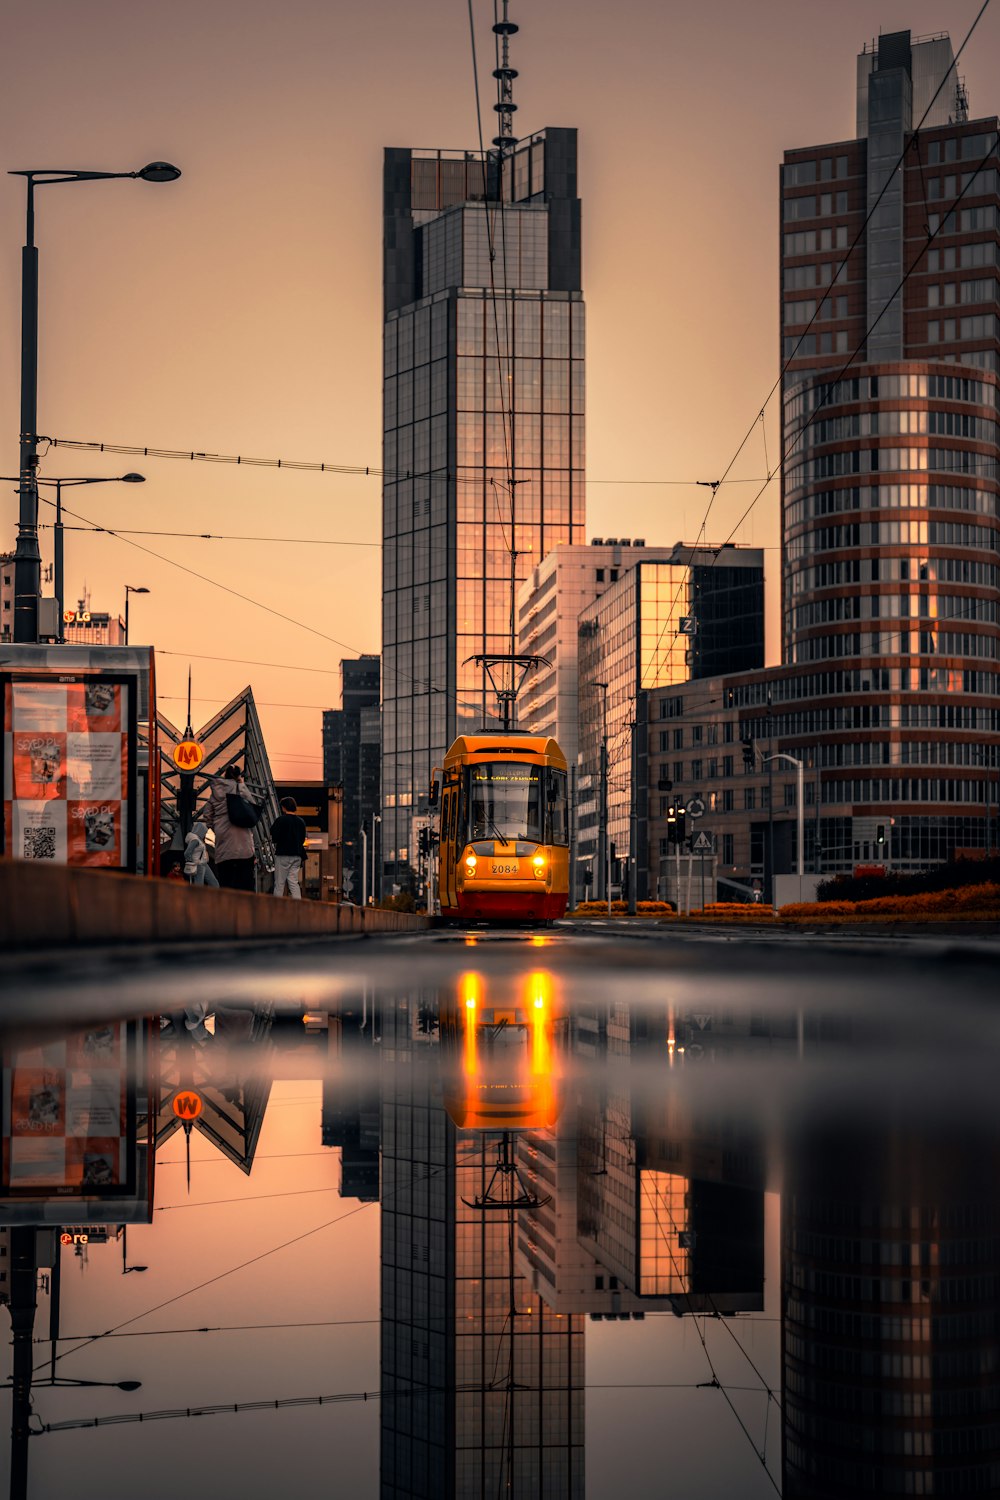 a yellow train traveling through a city next to tall buildings